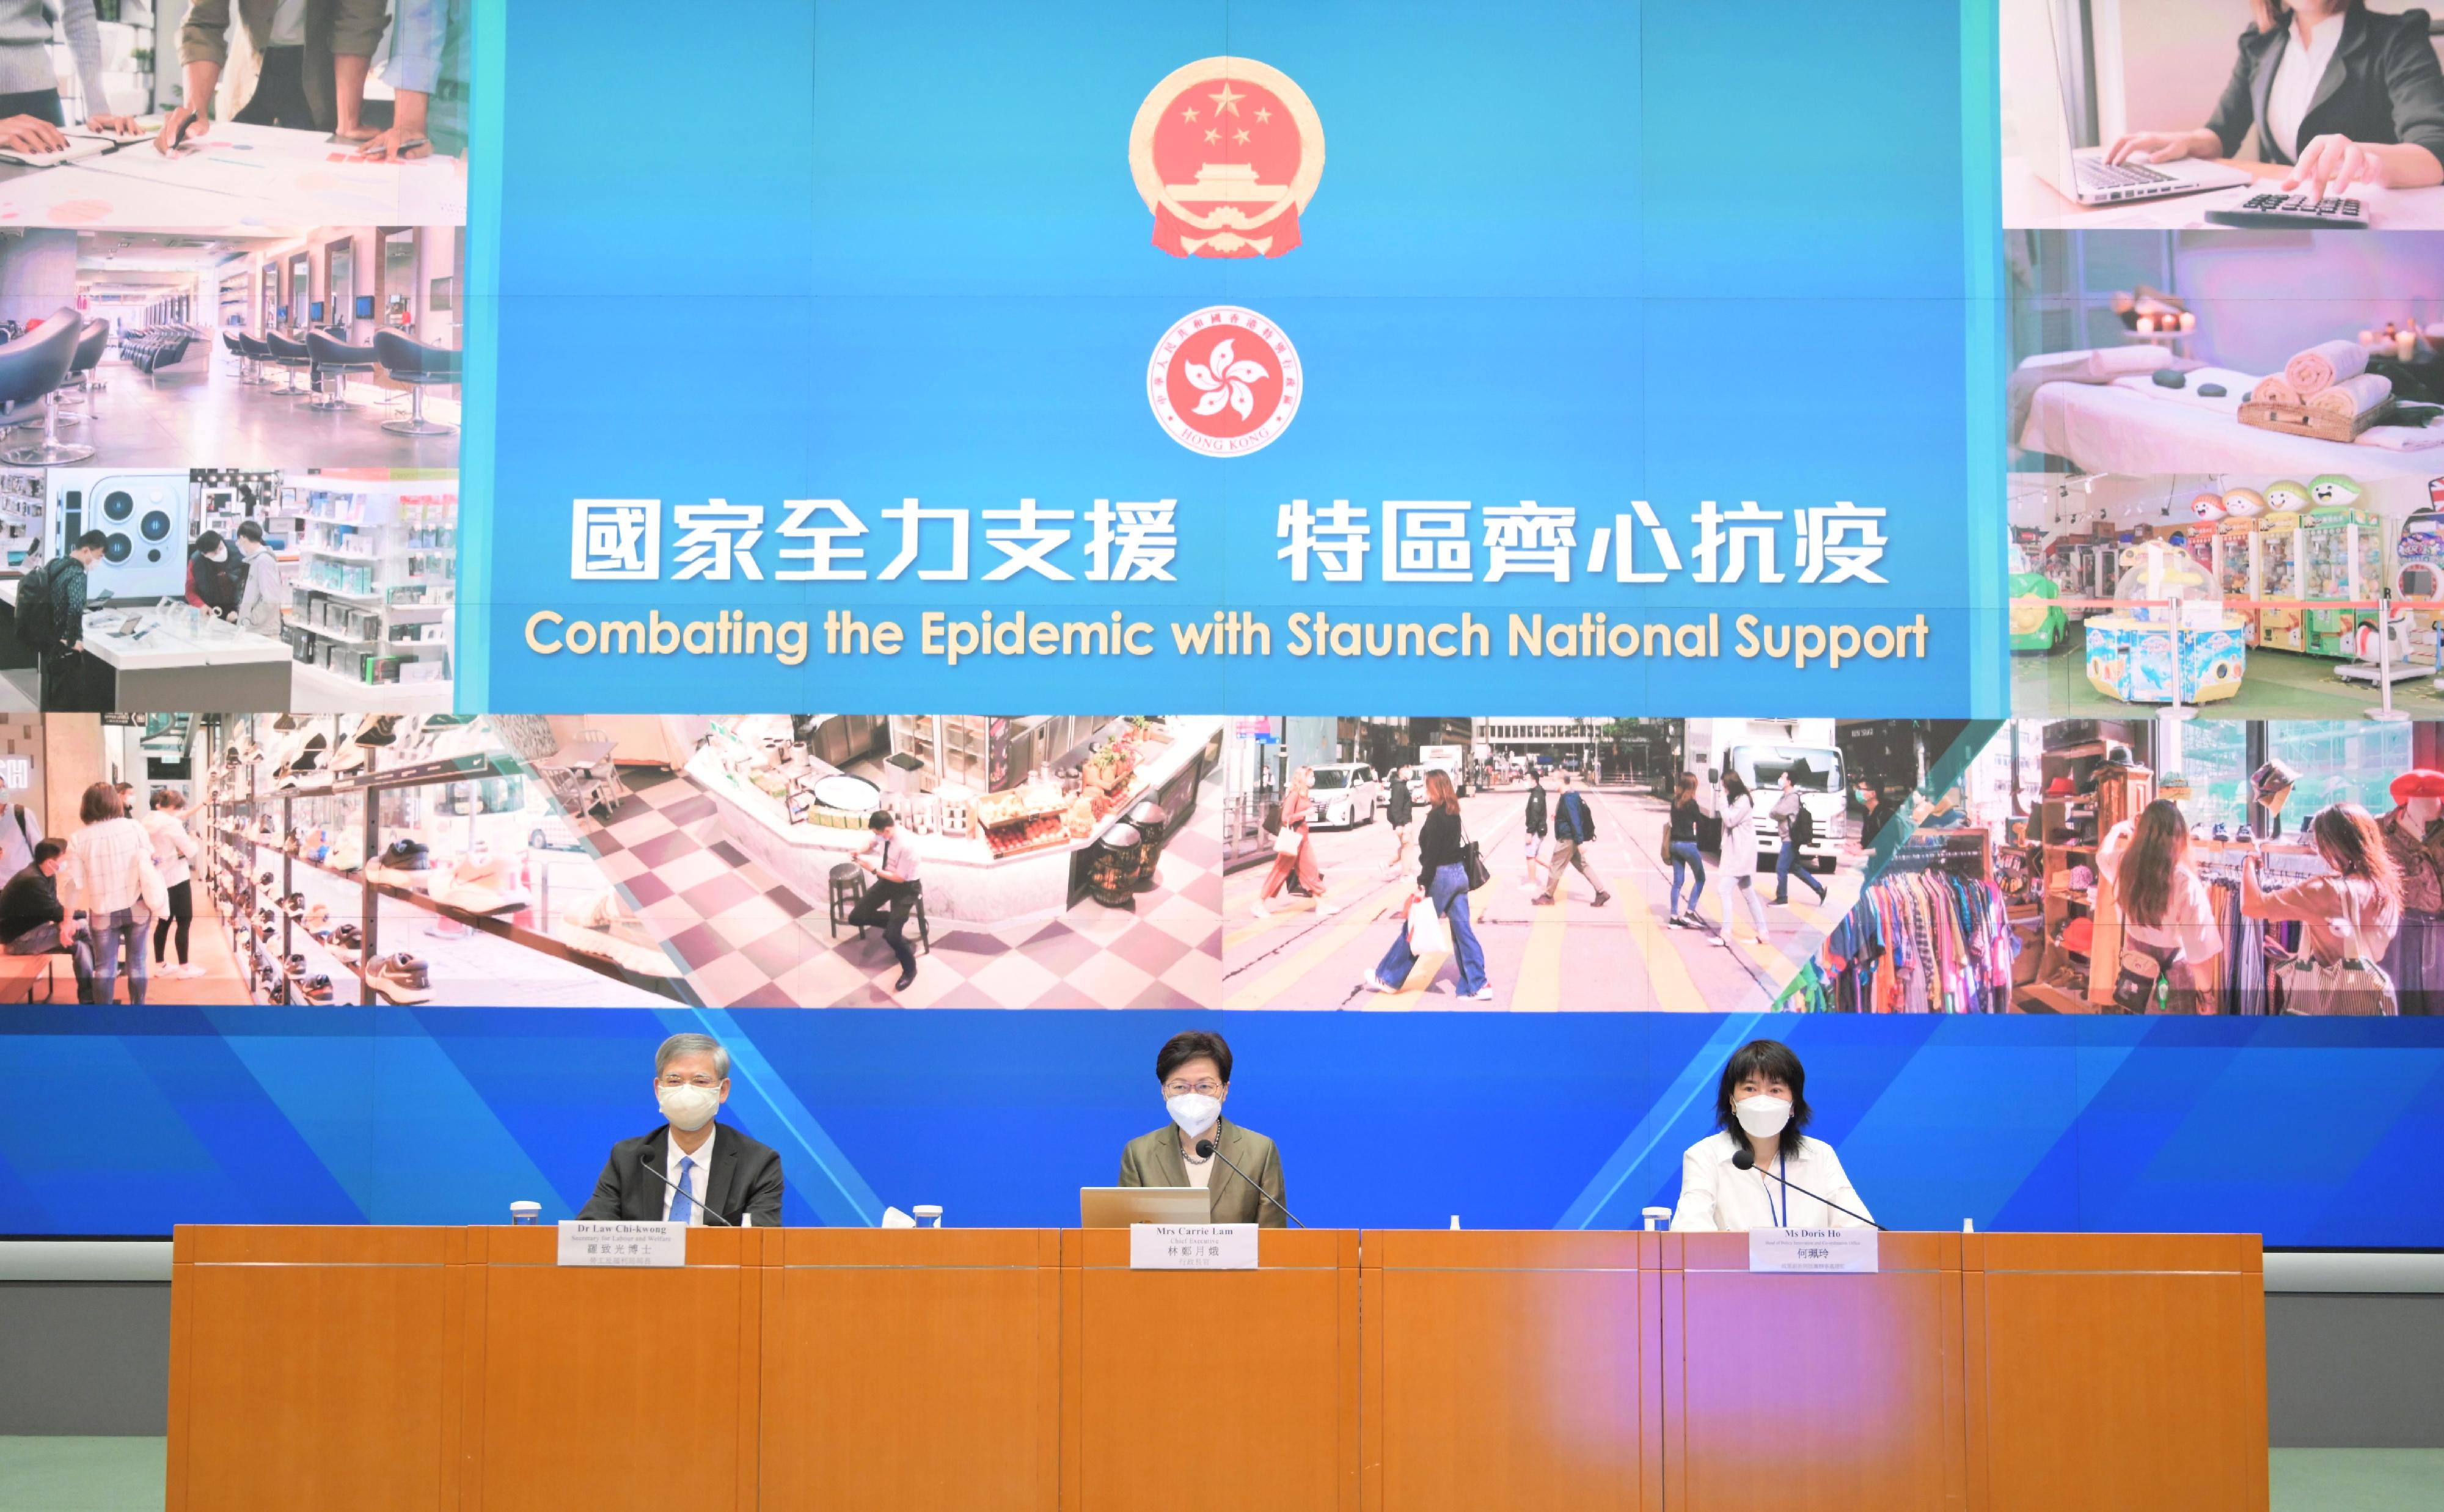 The Chief Executive, Mrs Carrie Lam (centre), holds a press conference on measures to fight COVID-19 with the Secretary for Labour and Welfare, Dr Law Chi-kwong (left), and the Head of the Policy Innovation and Co-ordination Office, Ms Doris Ho (right), at the Central Government Offices, Tamar, today (April 7).